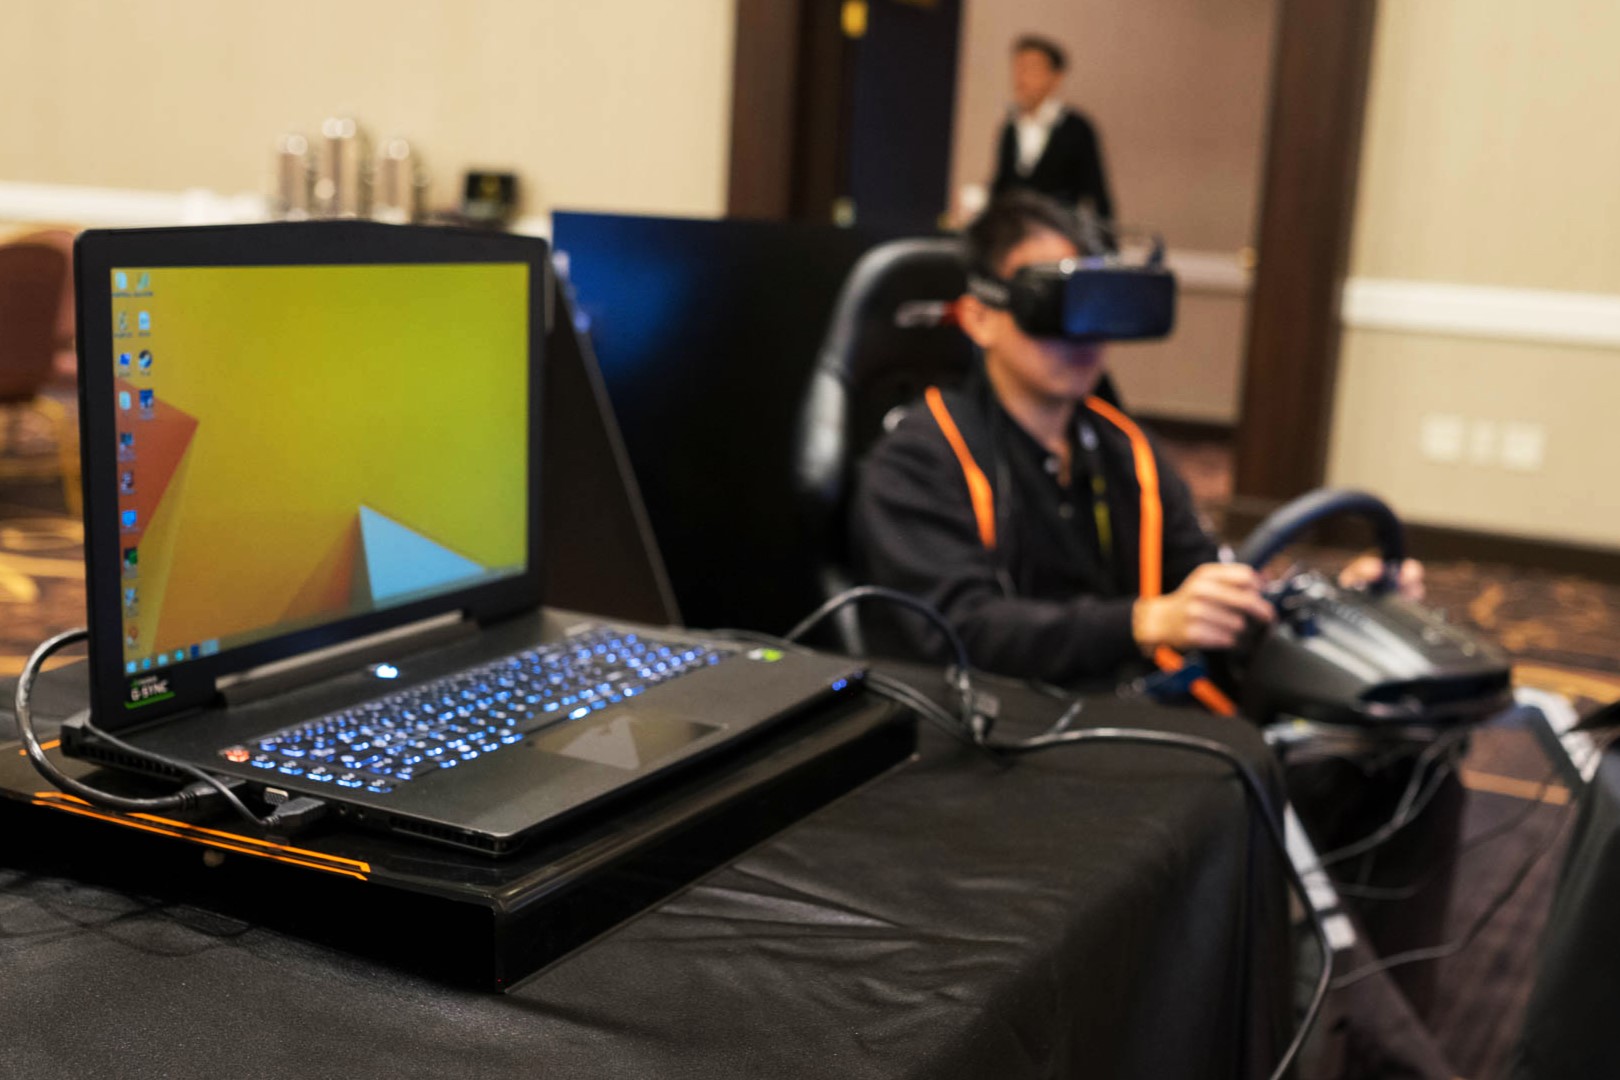 How To Use Oculus Rift With A Laptop